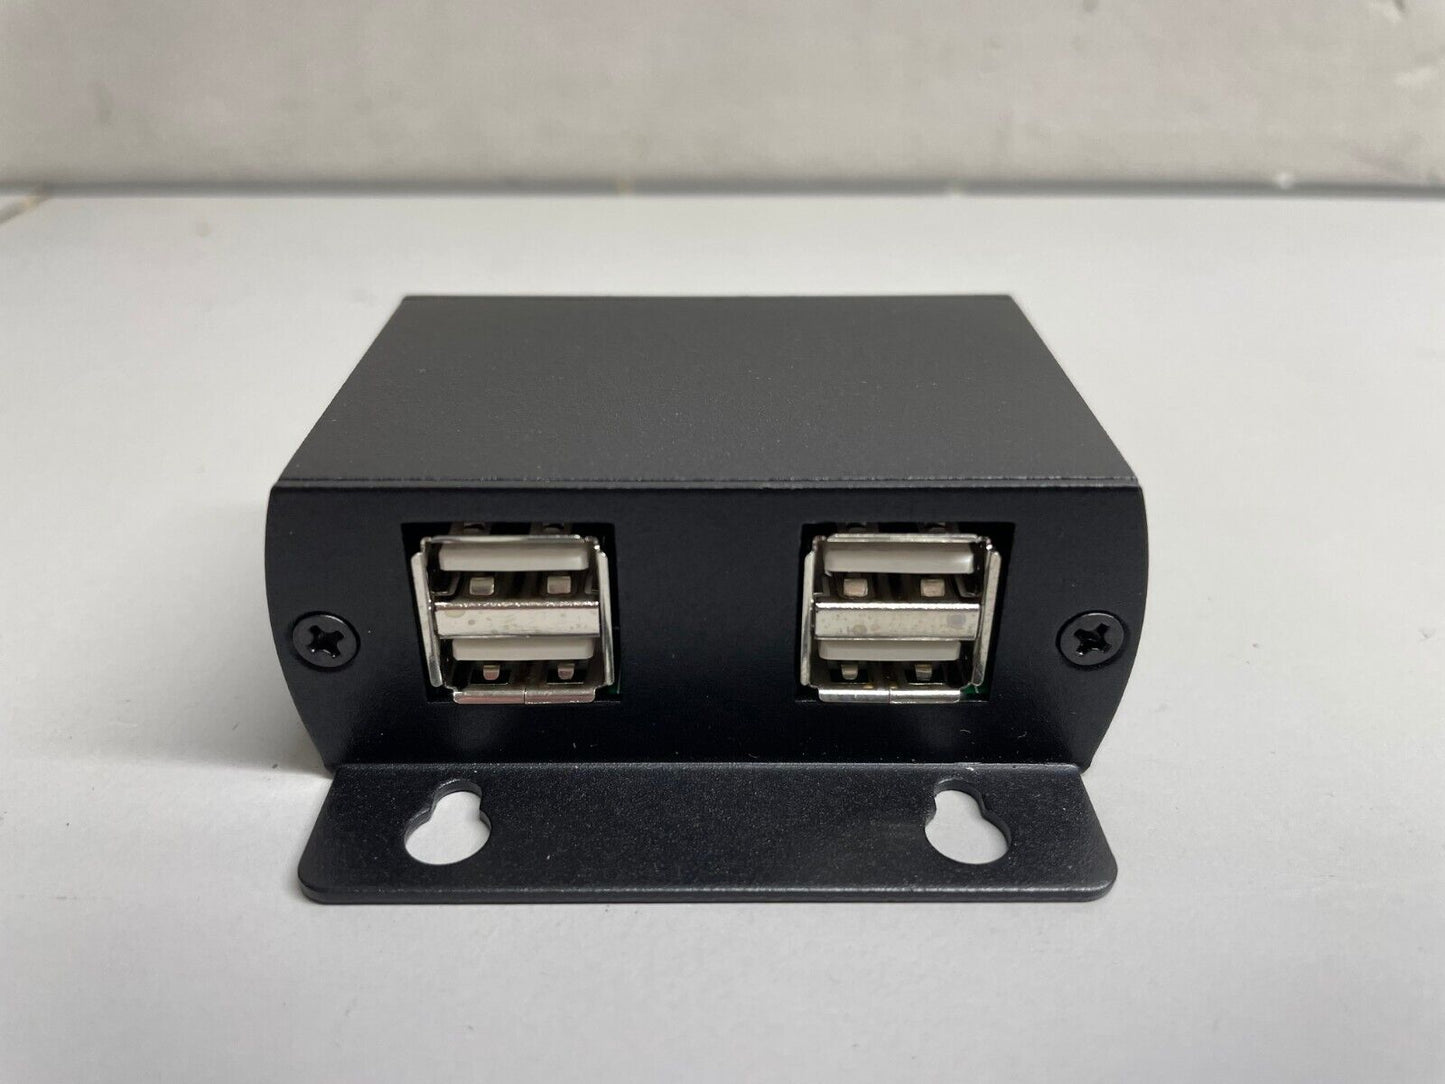 Comprehensive CUE-104FE USB 2.0 Extender with 4 Port Hub Up to 230ft